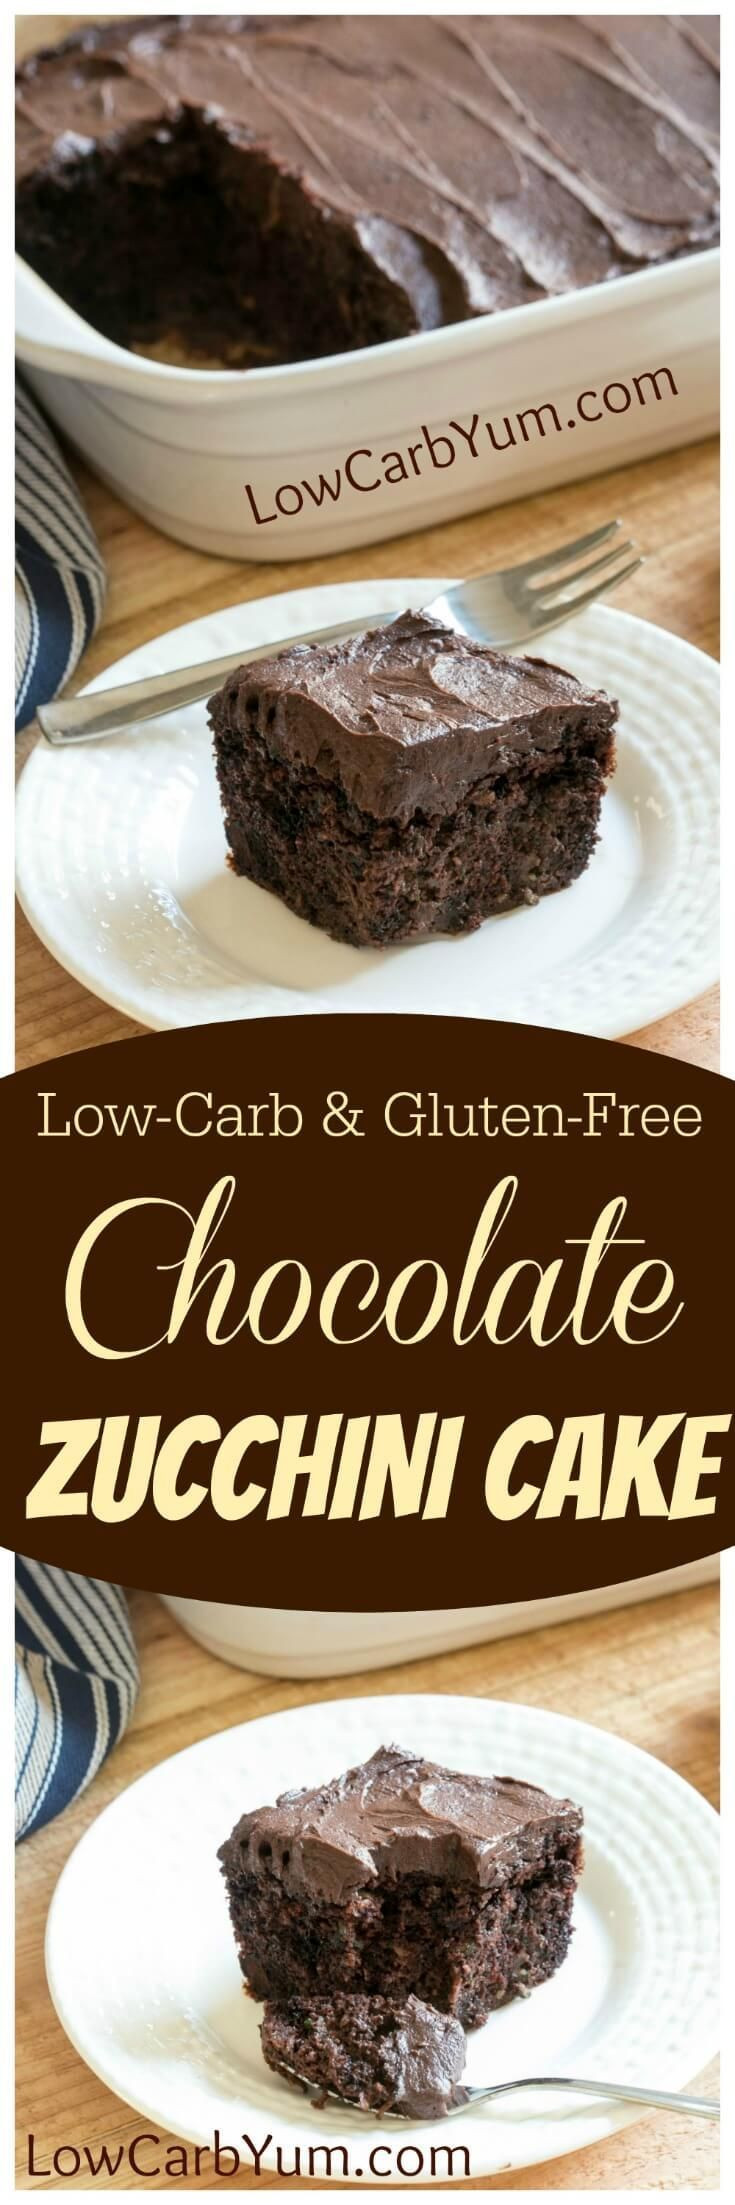 Best Low Carb Recipes Ever
 17 Best ideas about It Is Well on Pinterest